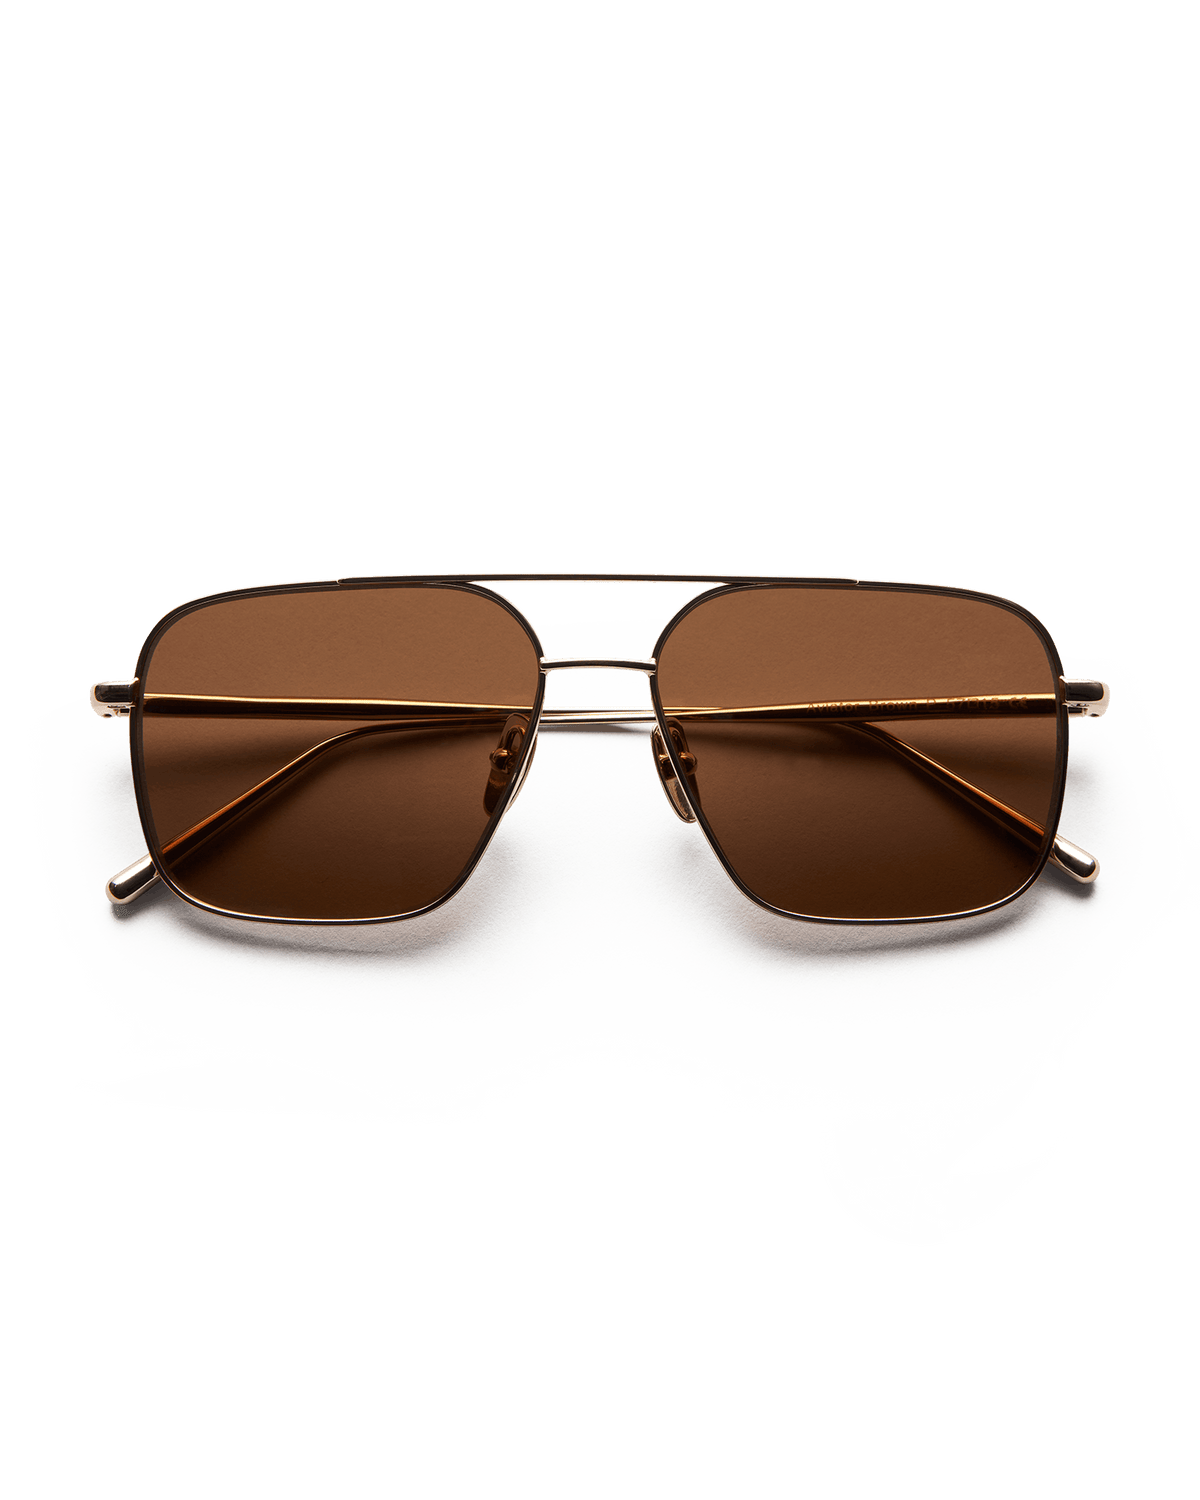 Soft gold coloured framed sunglasses with brown lenses